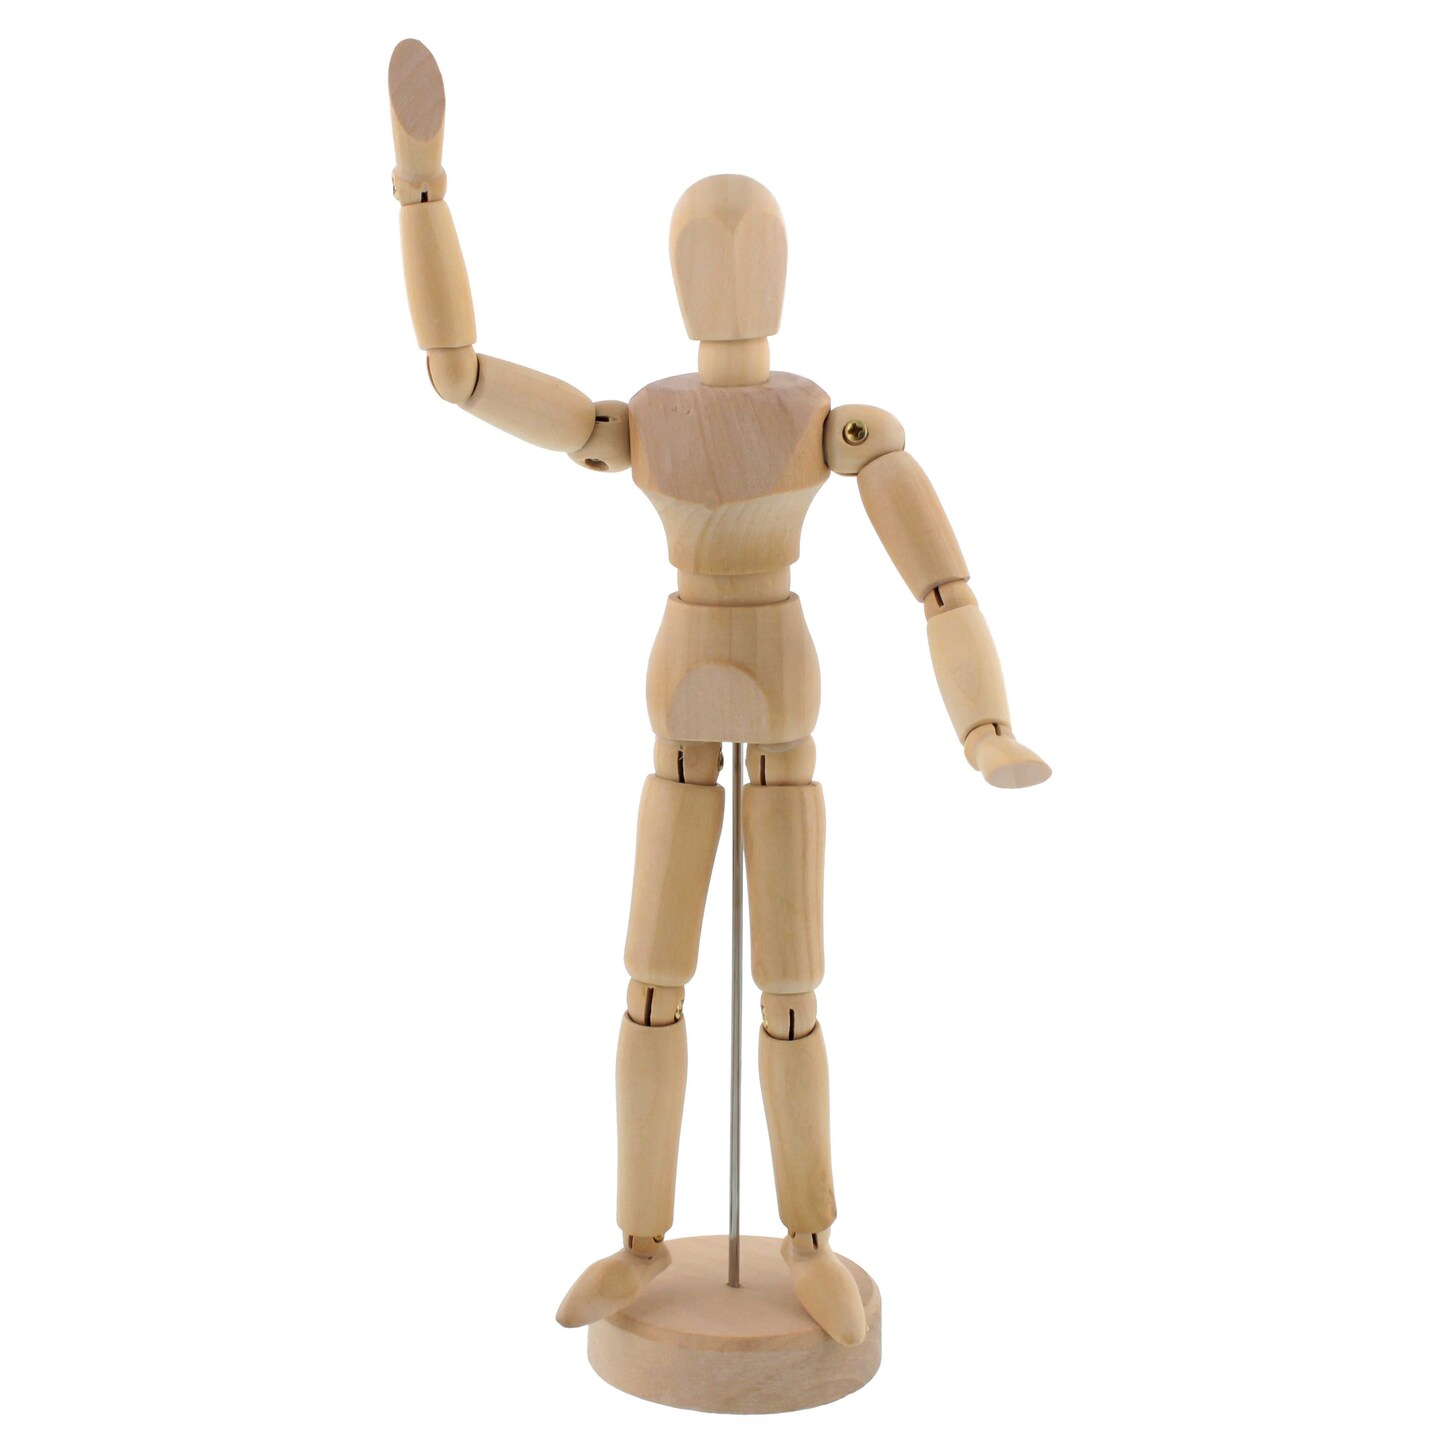 Action Figure Drawing Model, Drawing Figures For Artists Action Figure Model  Human Mannequin Man Woman Kits For Sketching, Painting, Drawing, Artist 